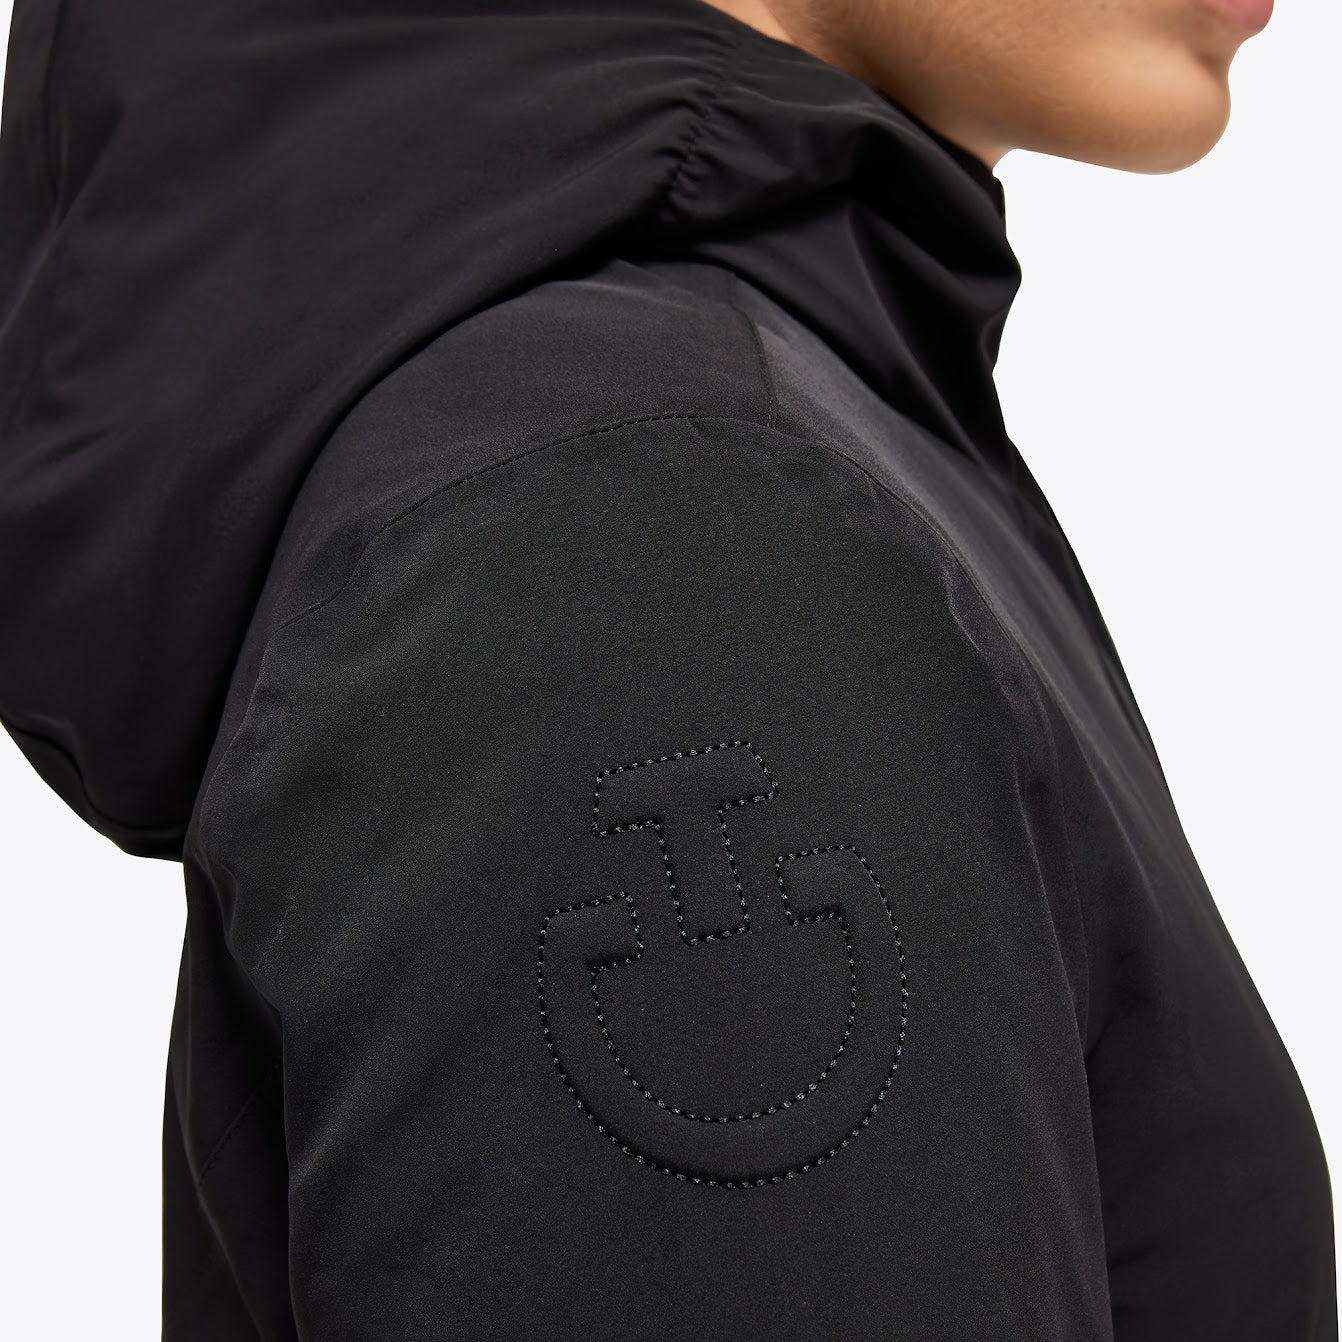 The Cavalleria Toscana black Soft Shell Wind Proof Coat. Designed for outdoor riding and errands about the stables, this understated performance padded jacket is defined by logo details and fine Cavalleria Toscana materials.